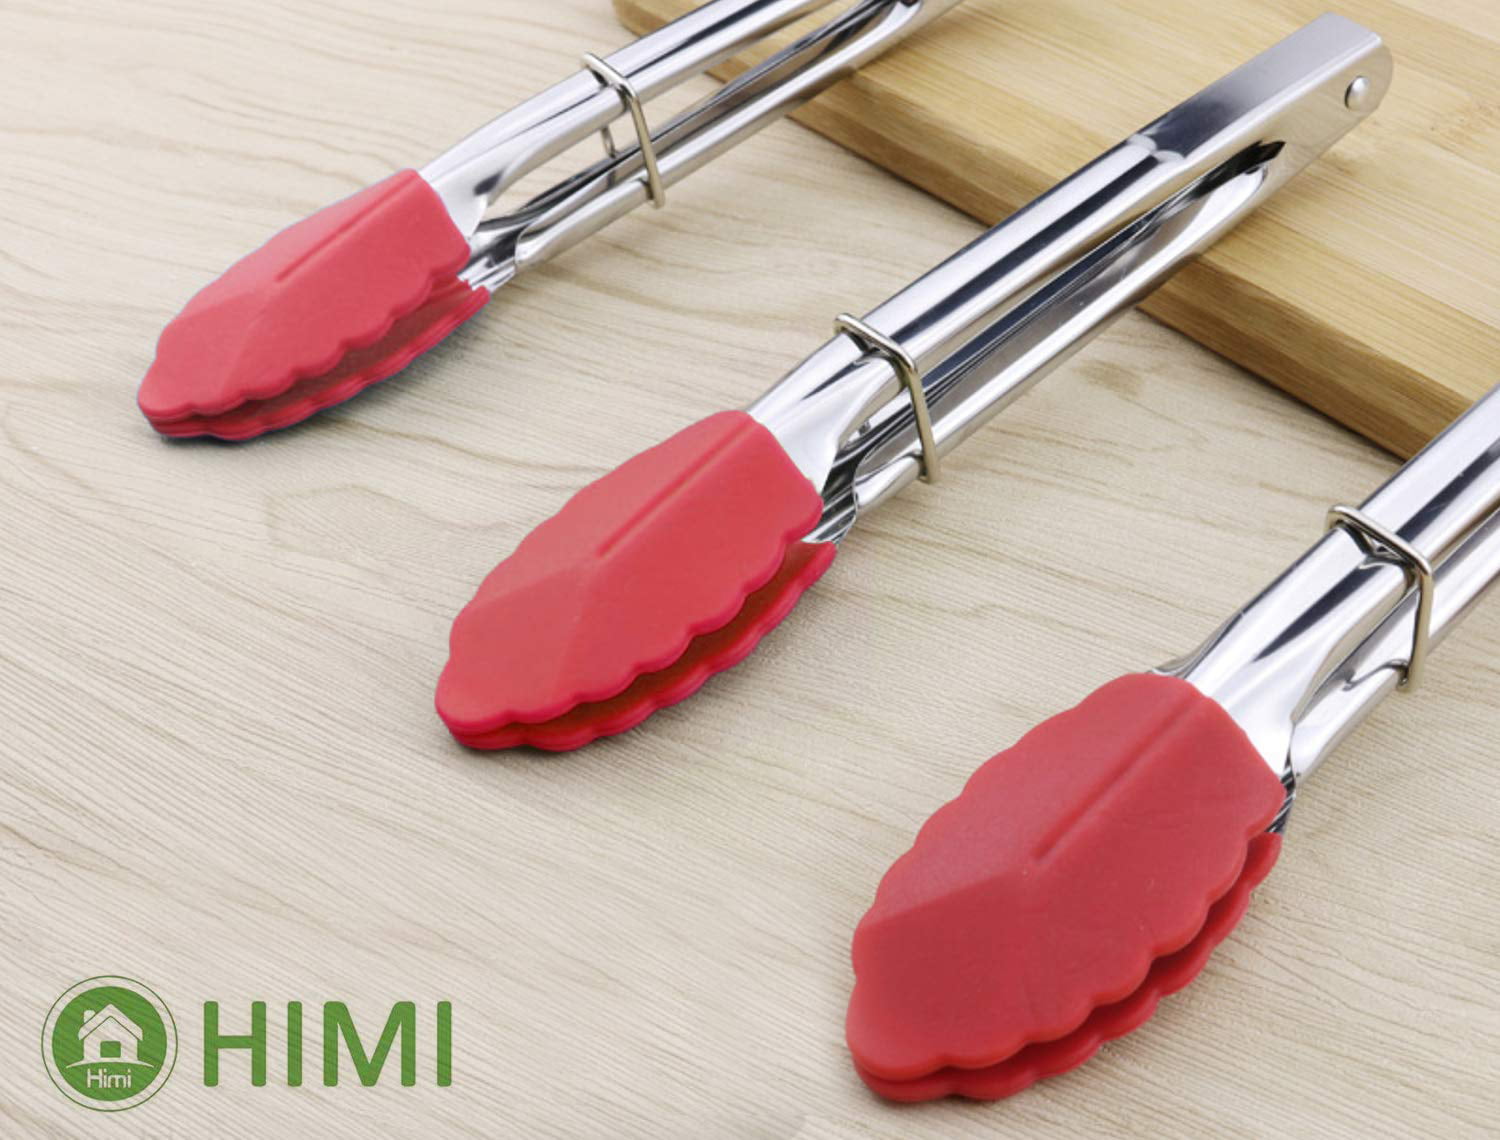 Himi Mini Tongs With Silicone Tips 7 Inch Silicone Cooking Tongs - Set Of 3  - Stainless Steel Small Food Tongs Prefect For Bbq, Salad, Grilling, Fryin